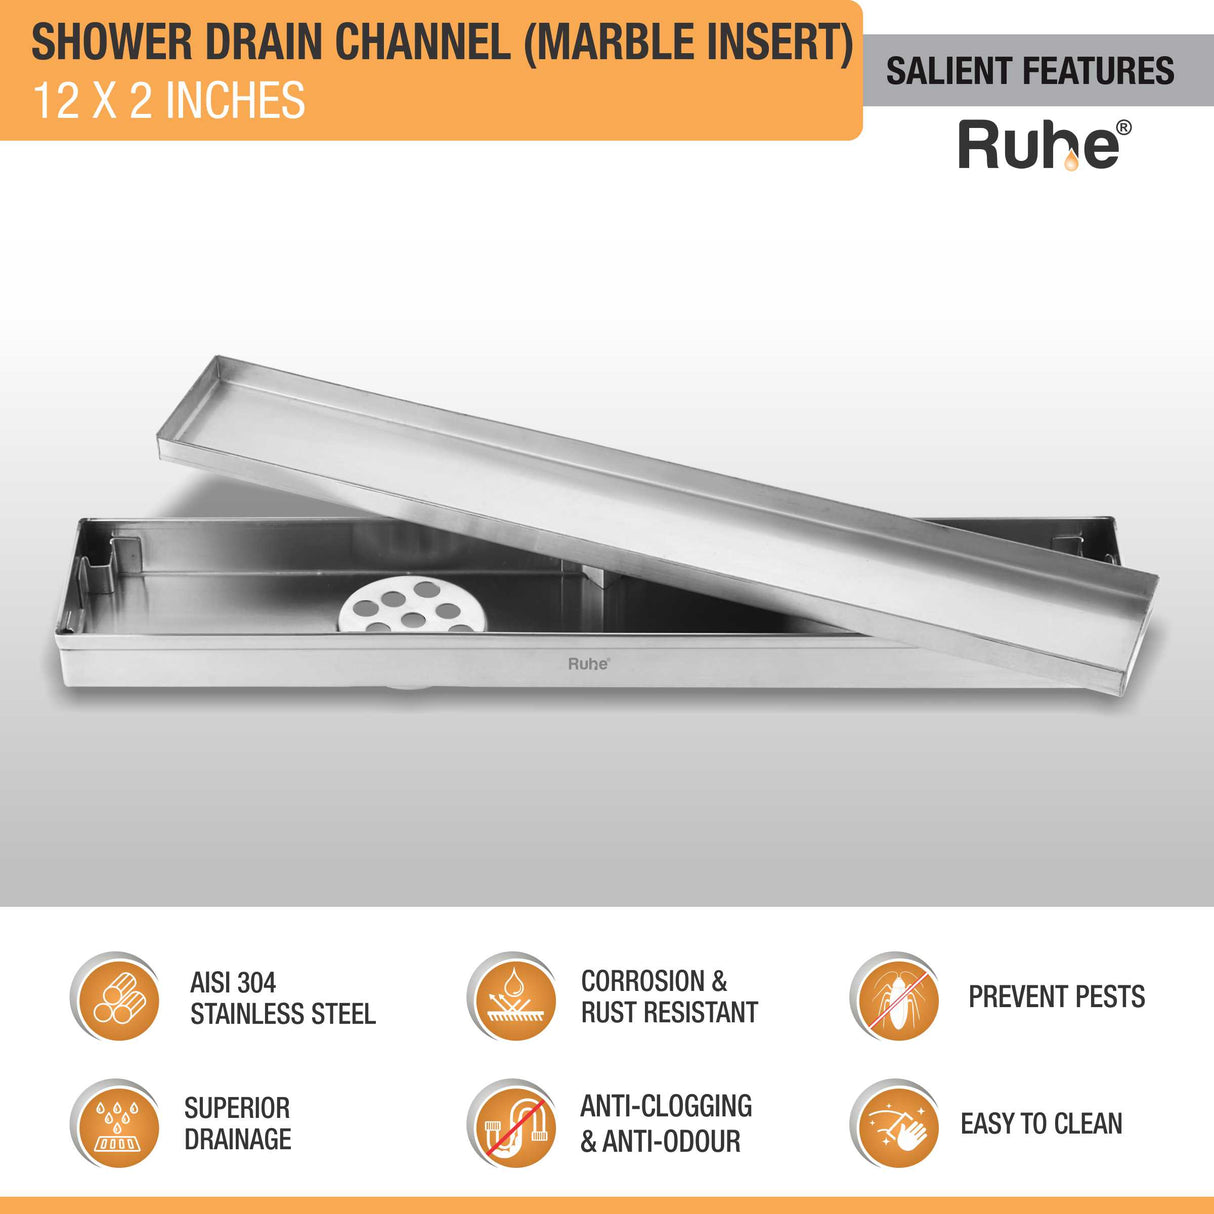 Marble Insert Shower Drain Channel (12 x 2 Inches) (304 Grade) features